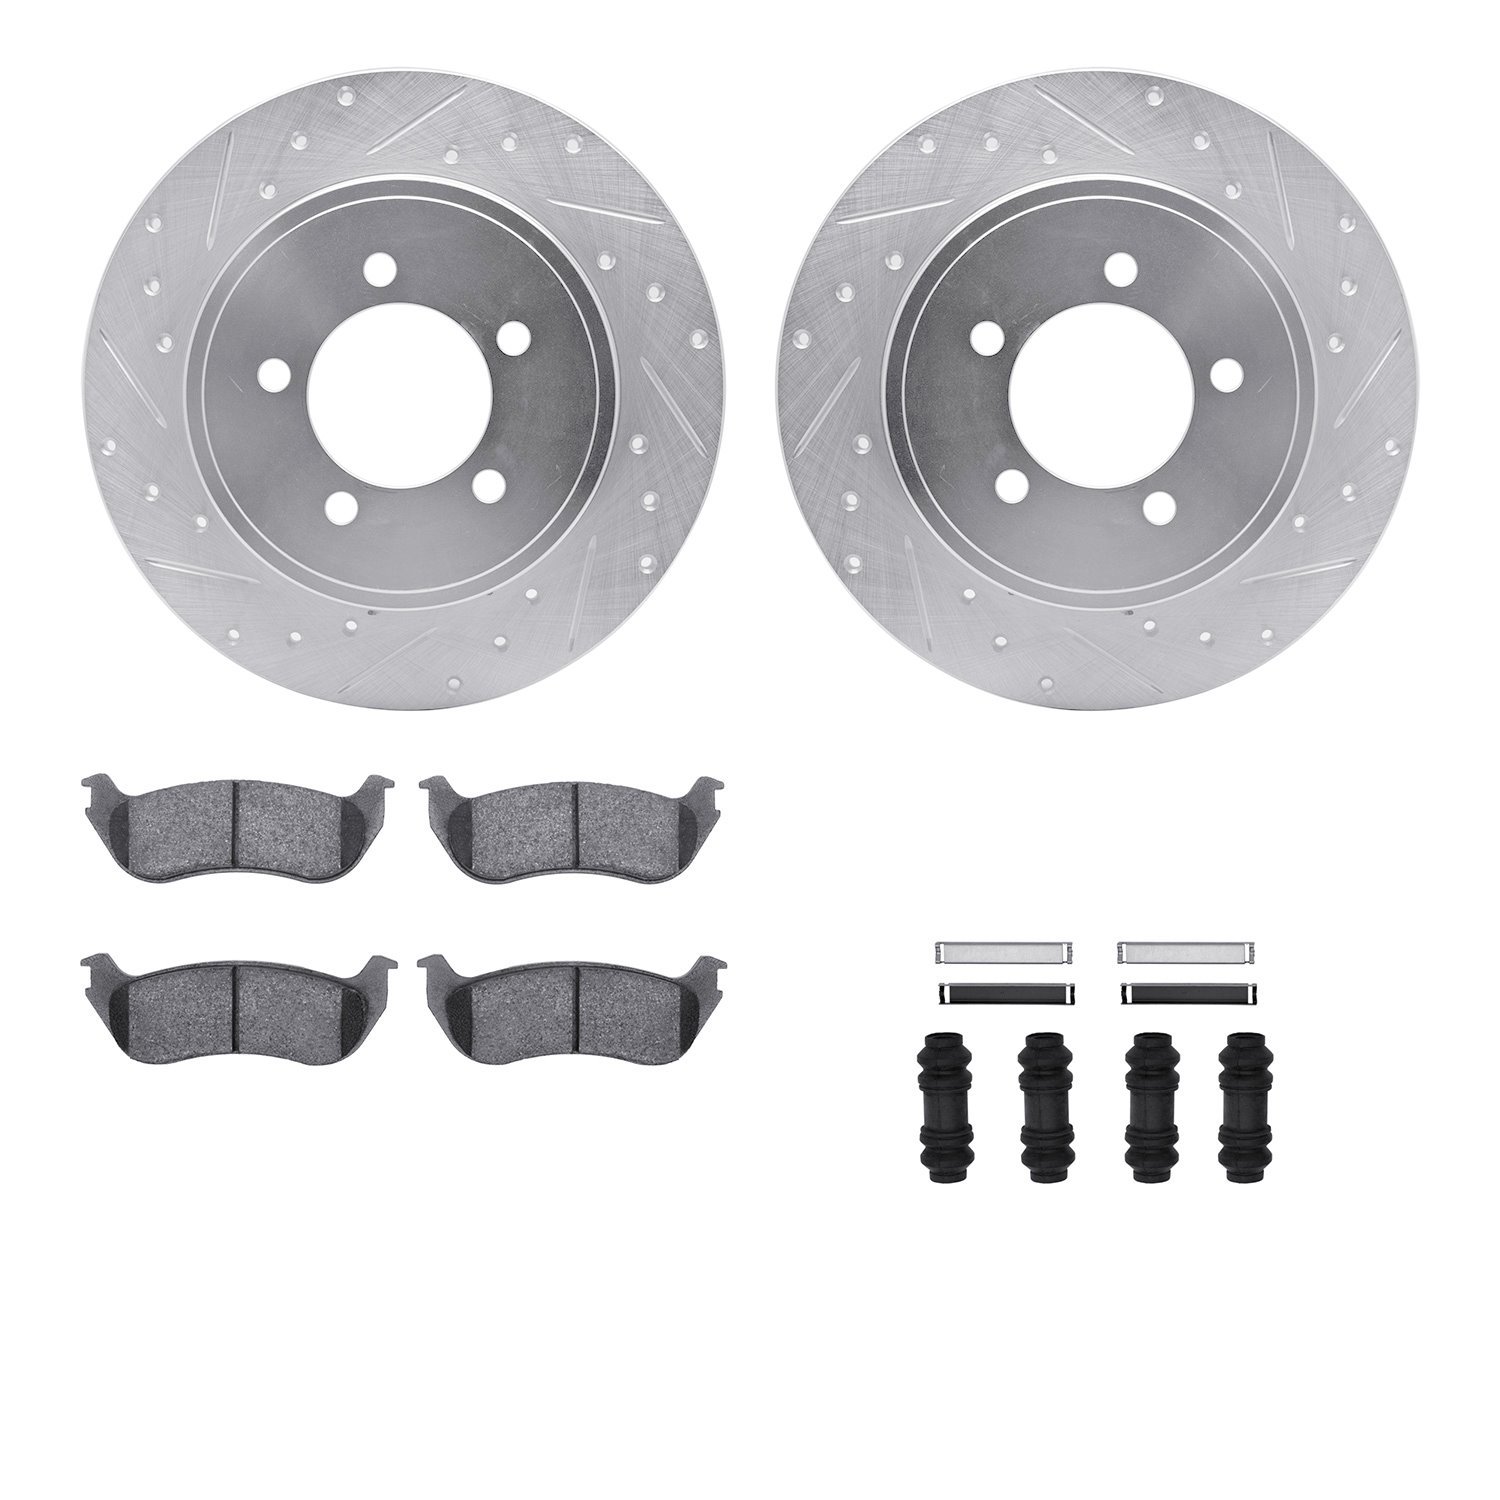 7412-54065 Drilled/Slotted Brake Rotors with Ultimate-Duty Brake Pads Kit & Hardware [Silver], 2002-2005 Ford/Lincoln/Mercury/Ma